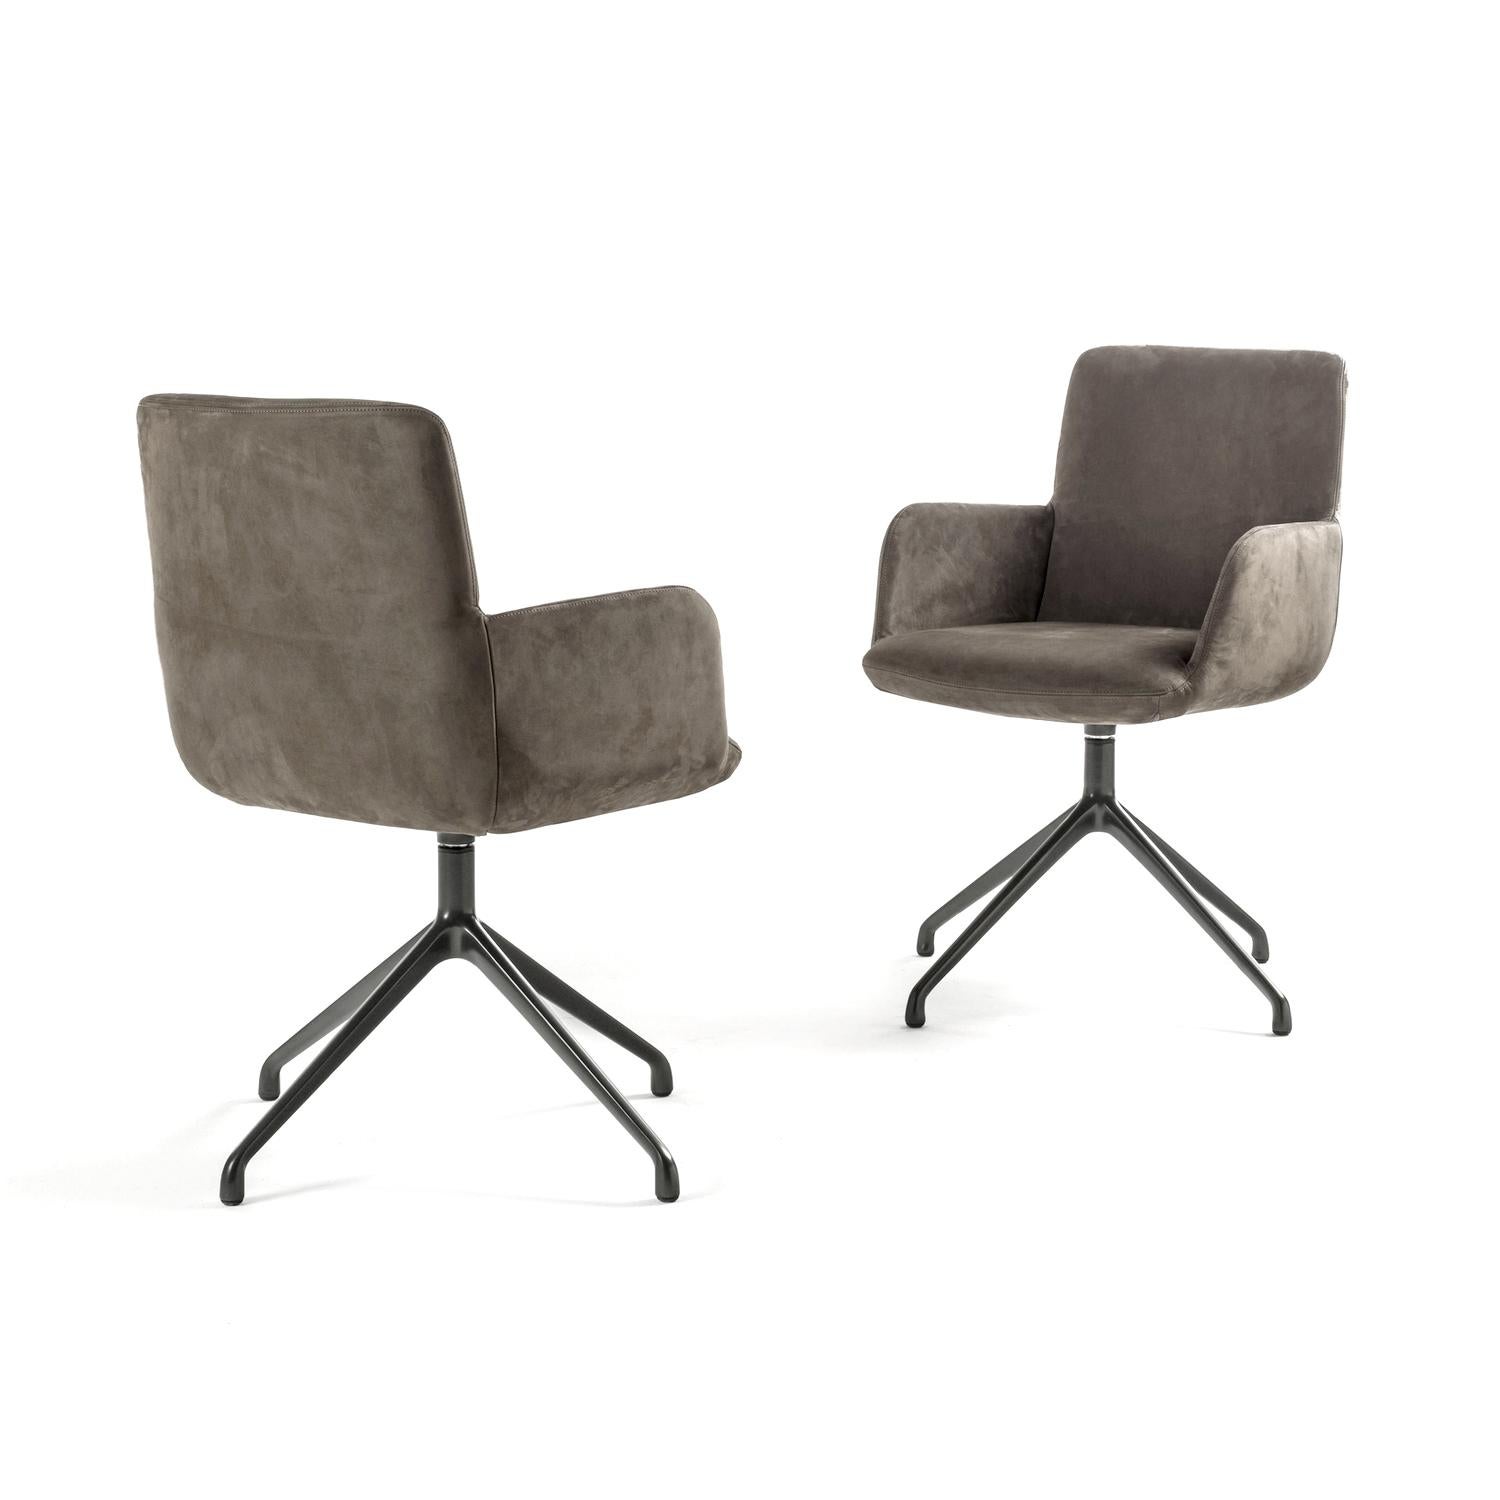 Modern In Stock in Los Angeles, Grey Nabuk Armchair by Claudio Bellini, Made in Italy